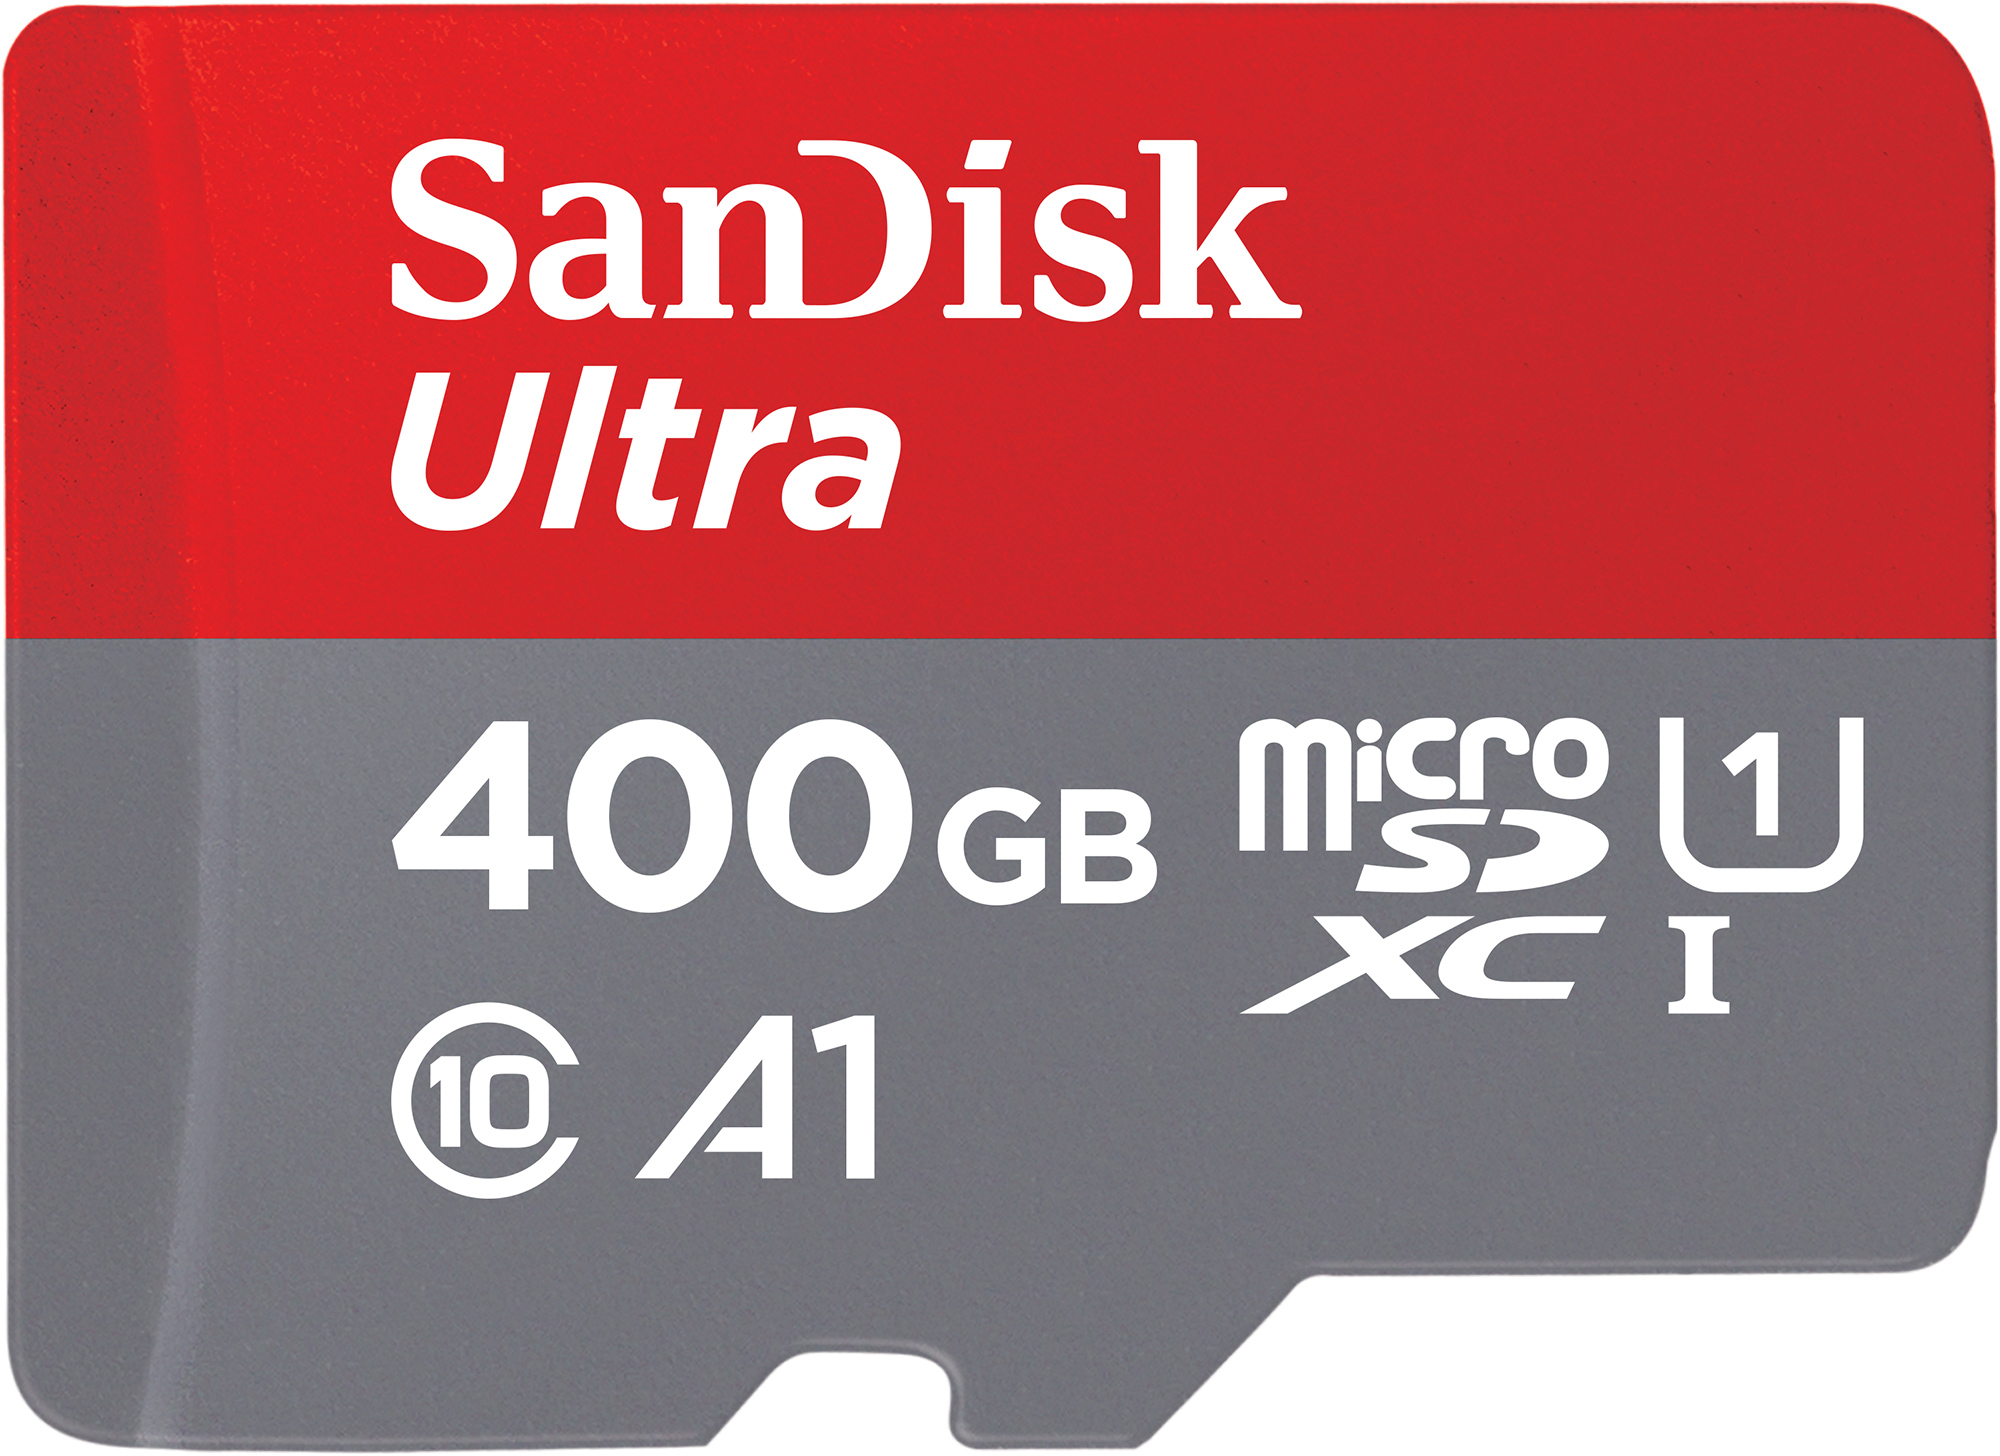 Western Digital Launches SanDisk Ultra microSD Card with 400 GB 